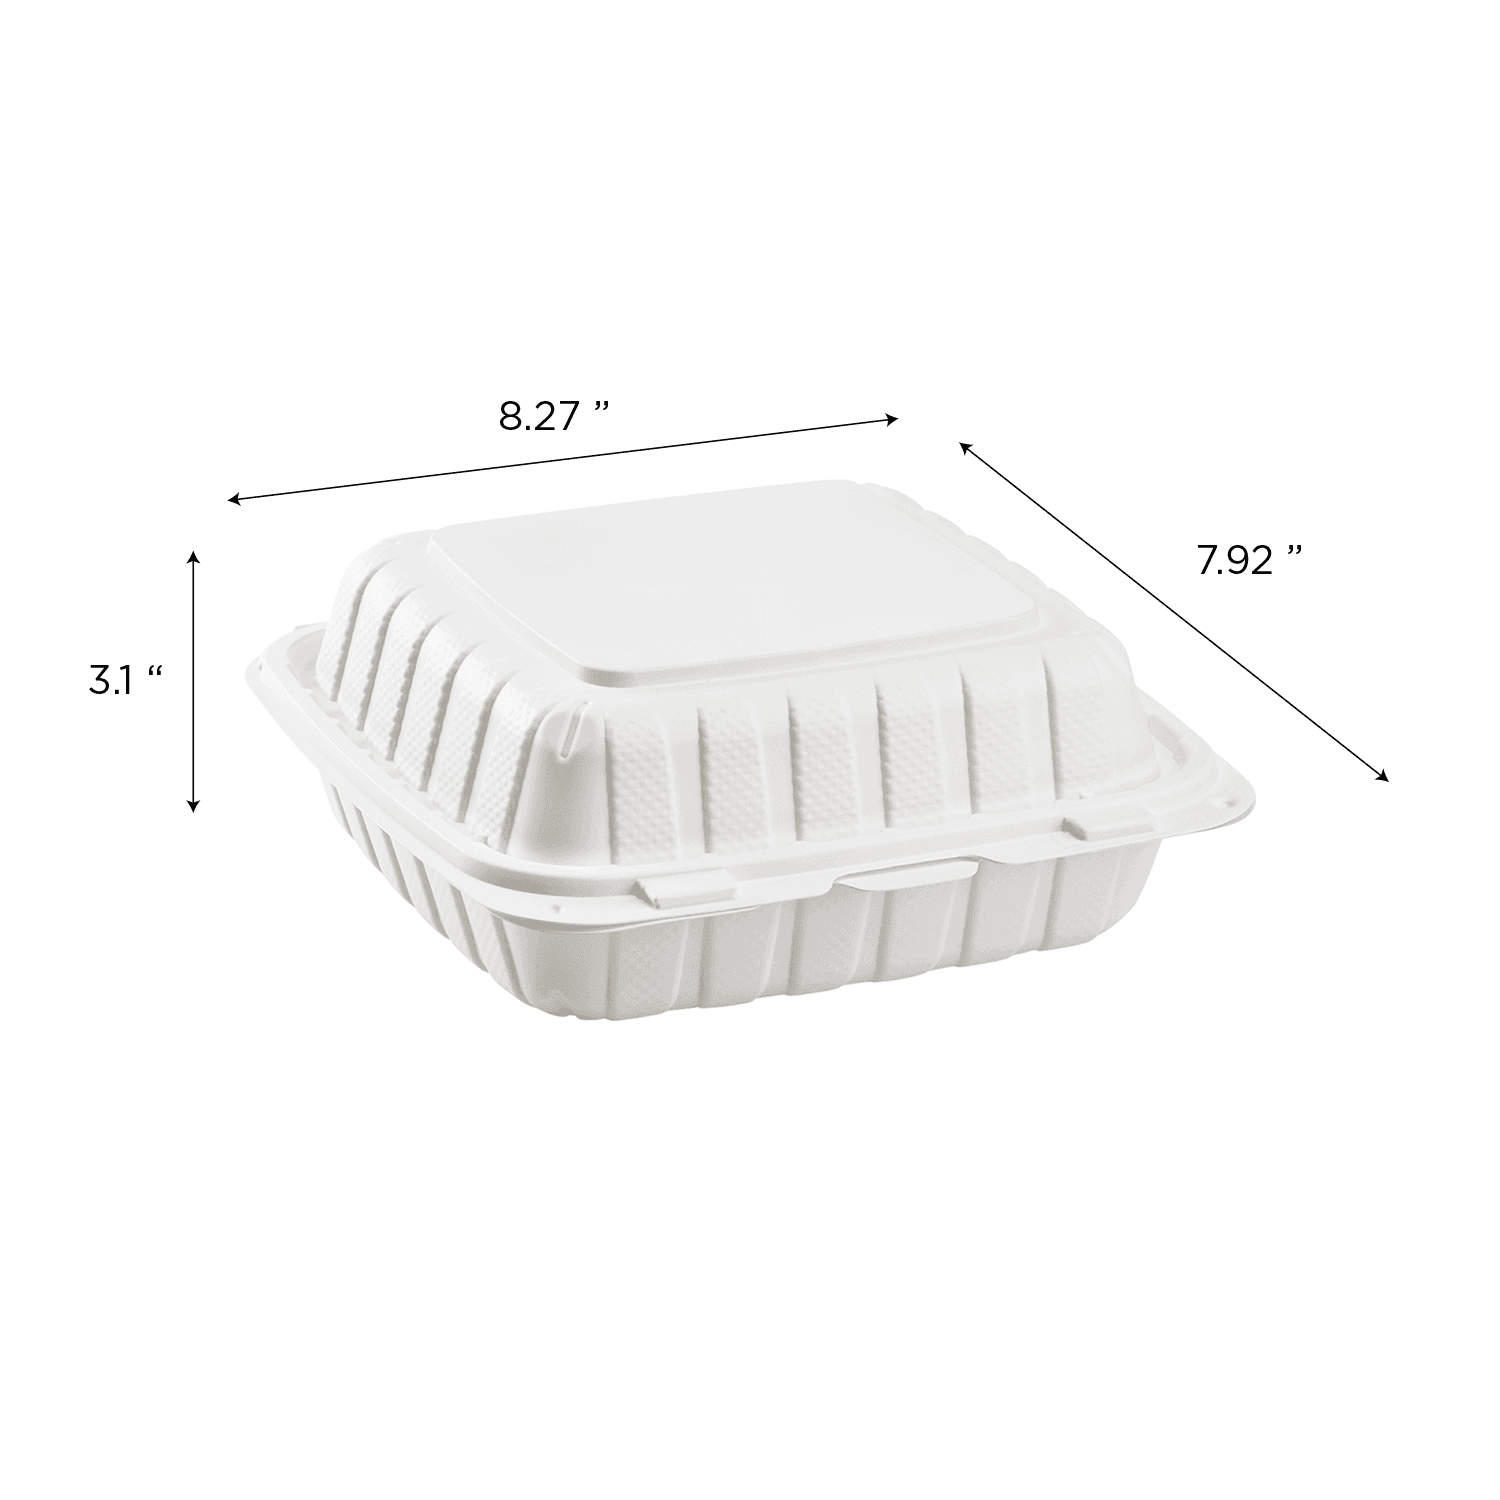 Karat Earth 8" x 8" Mineral Filled PP Hinged Container, White - 200 pcs